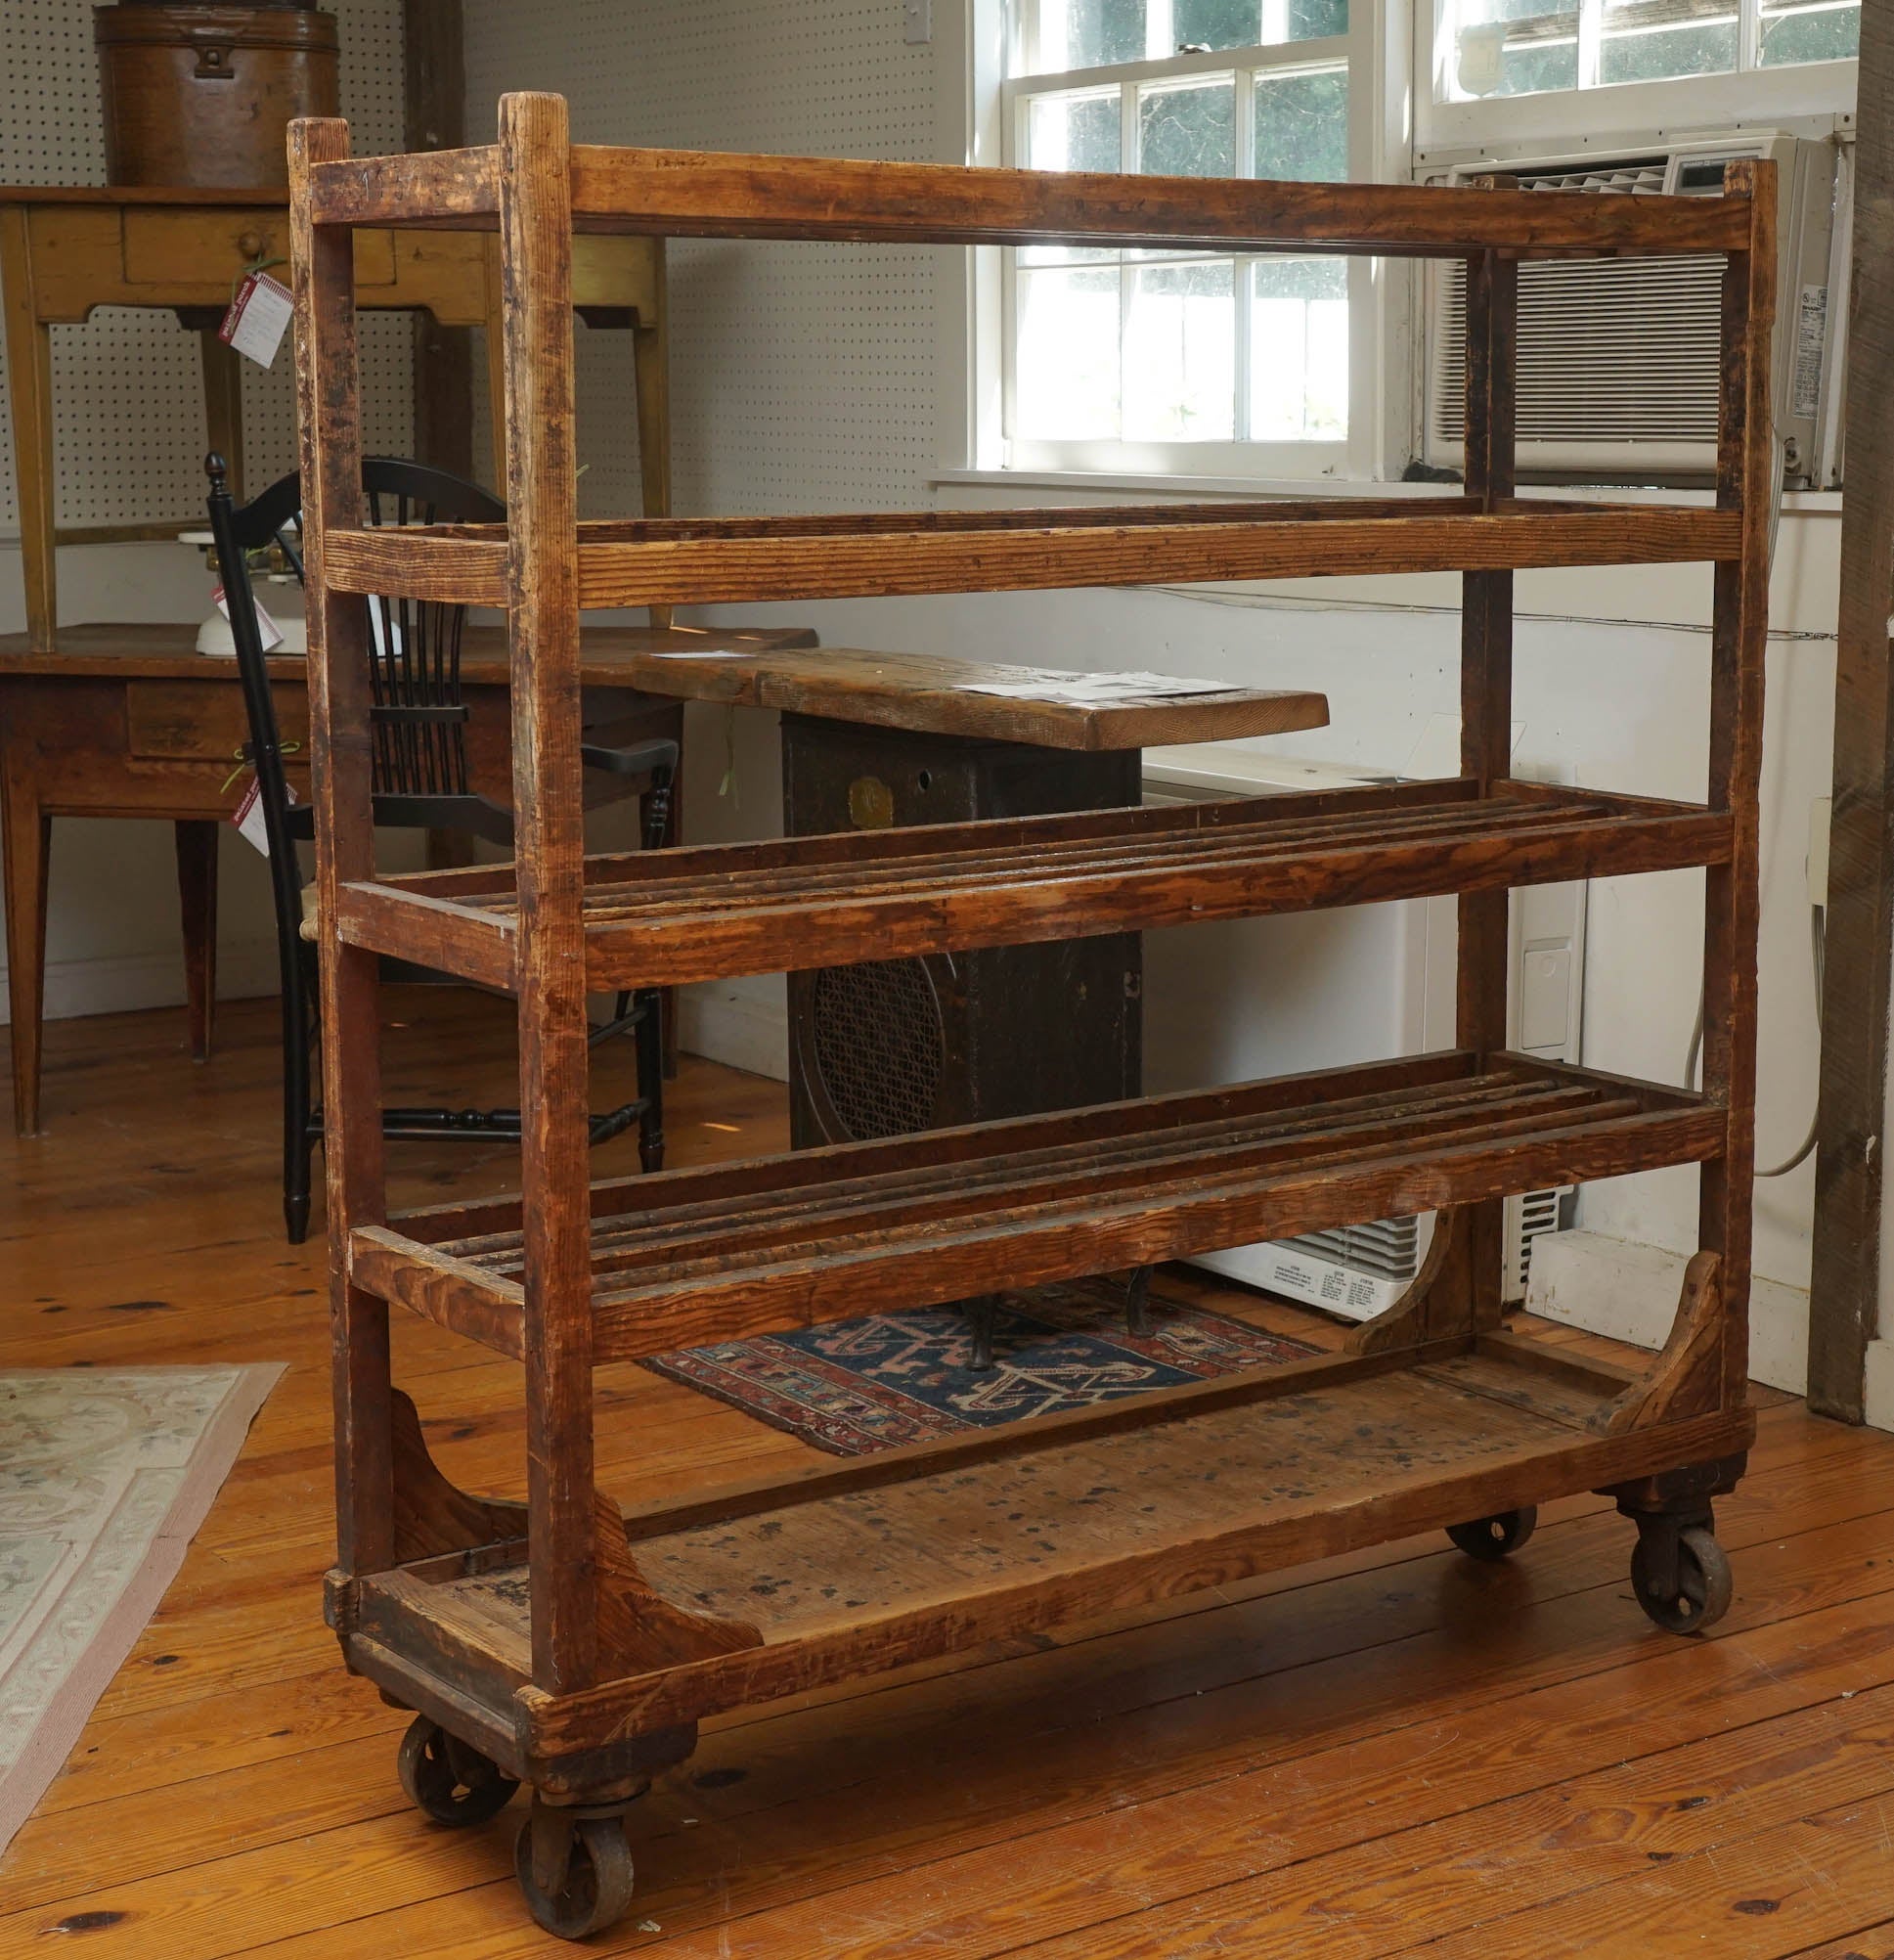 The French use these wooden trolleys as bakery racks to cool down pies. It is what the English use as shoe drying racks. This piece has original casters and the bottom shelf is solid wood. A most useful piece of furniture to put in a kitchen for